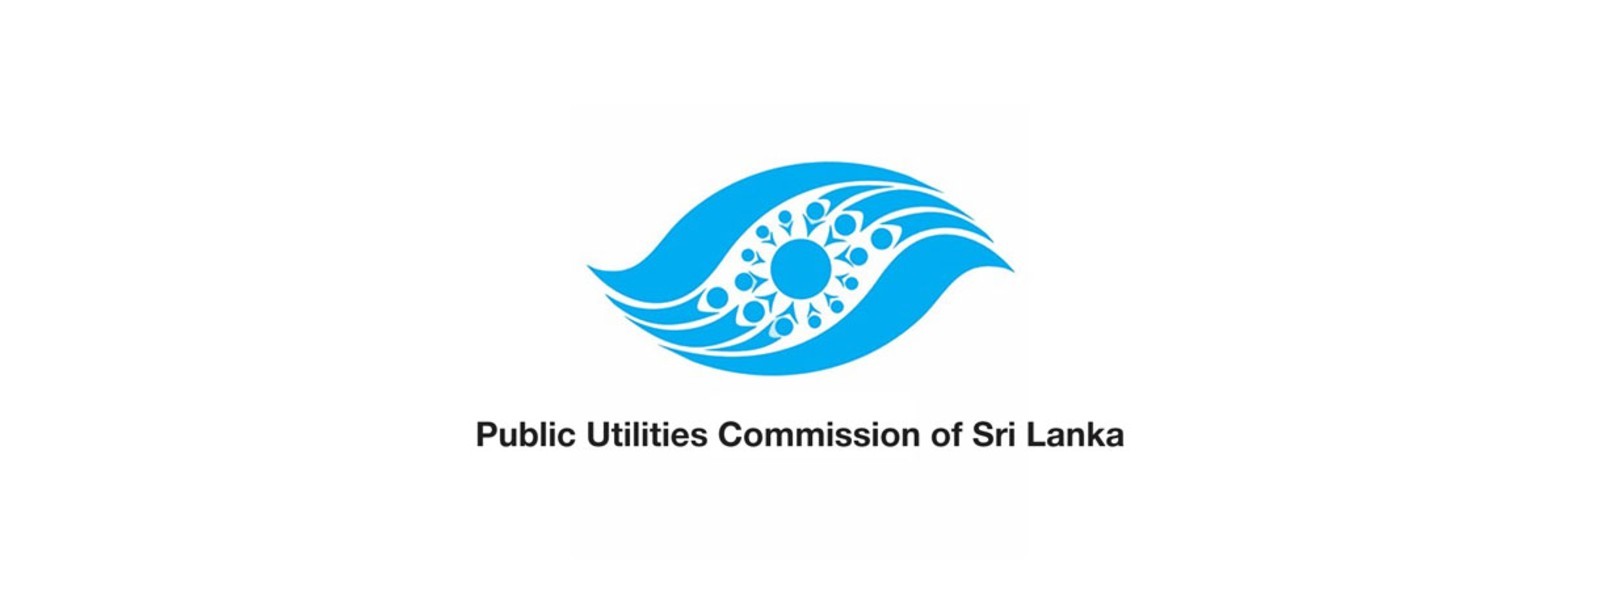 No power cuts during morning for two days: PUCSL